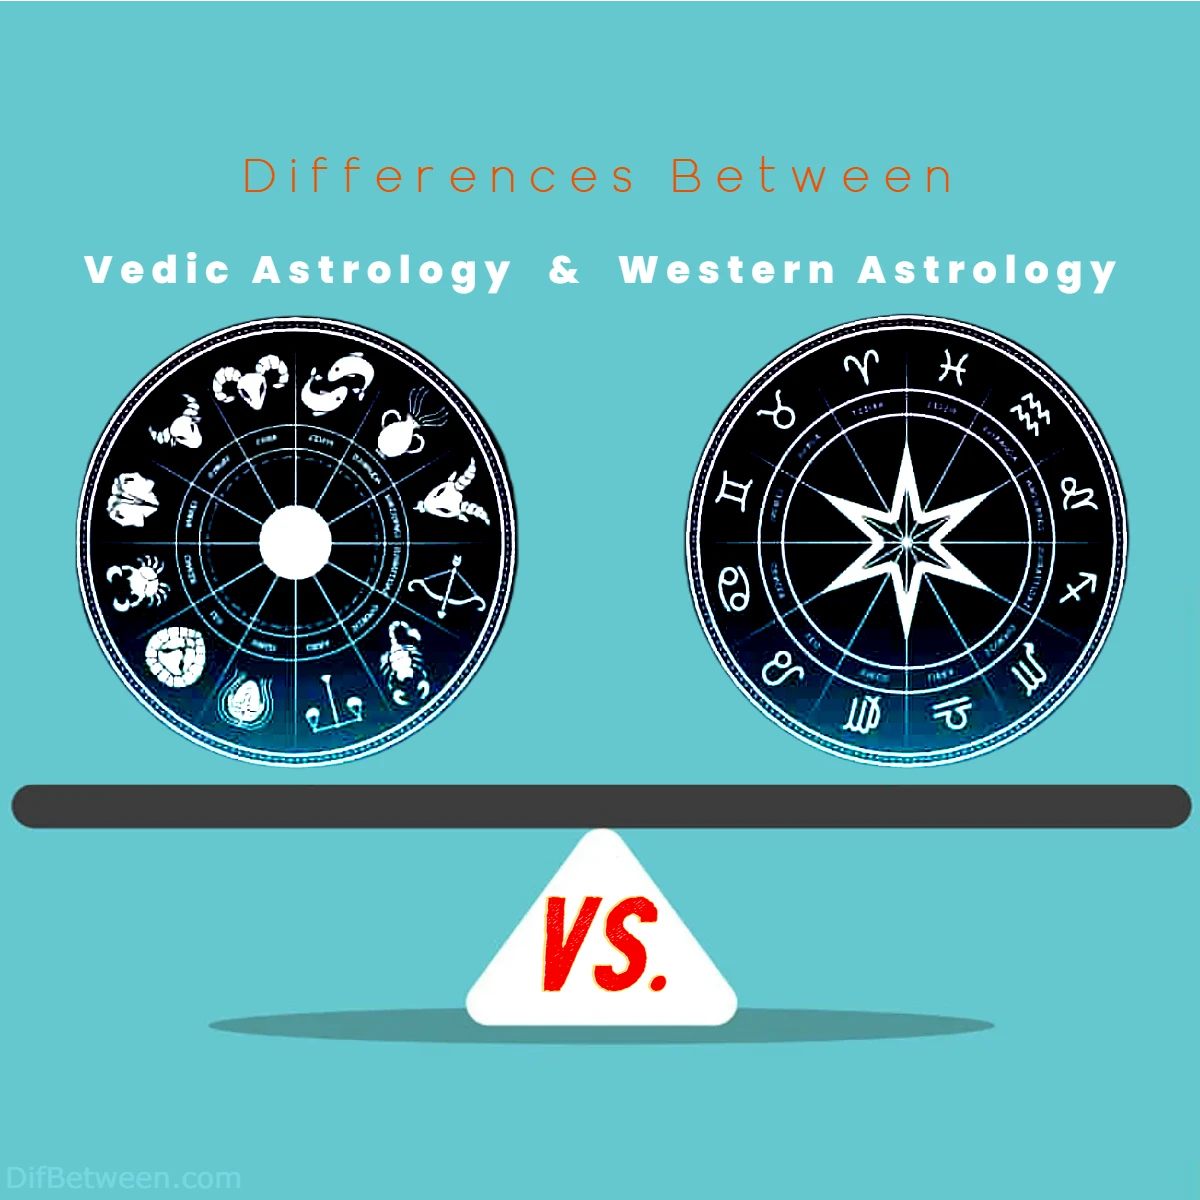 Differences Between Vedic vs Western Astrology